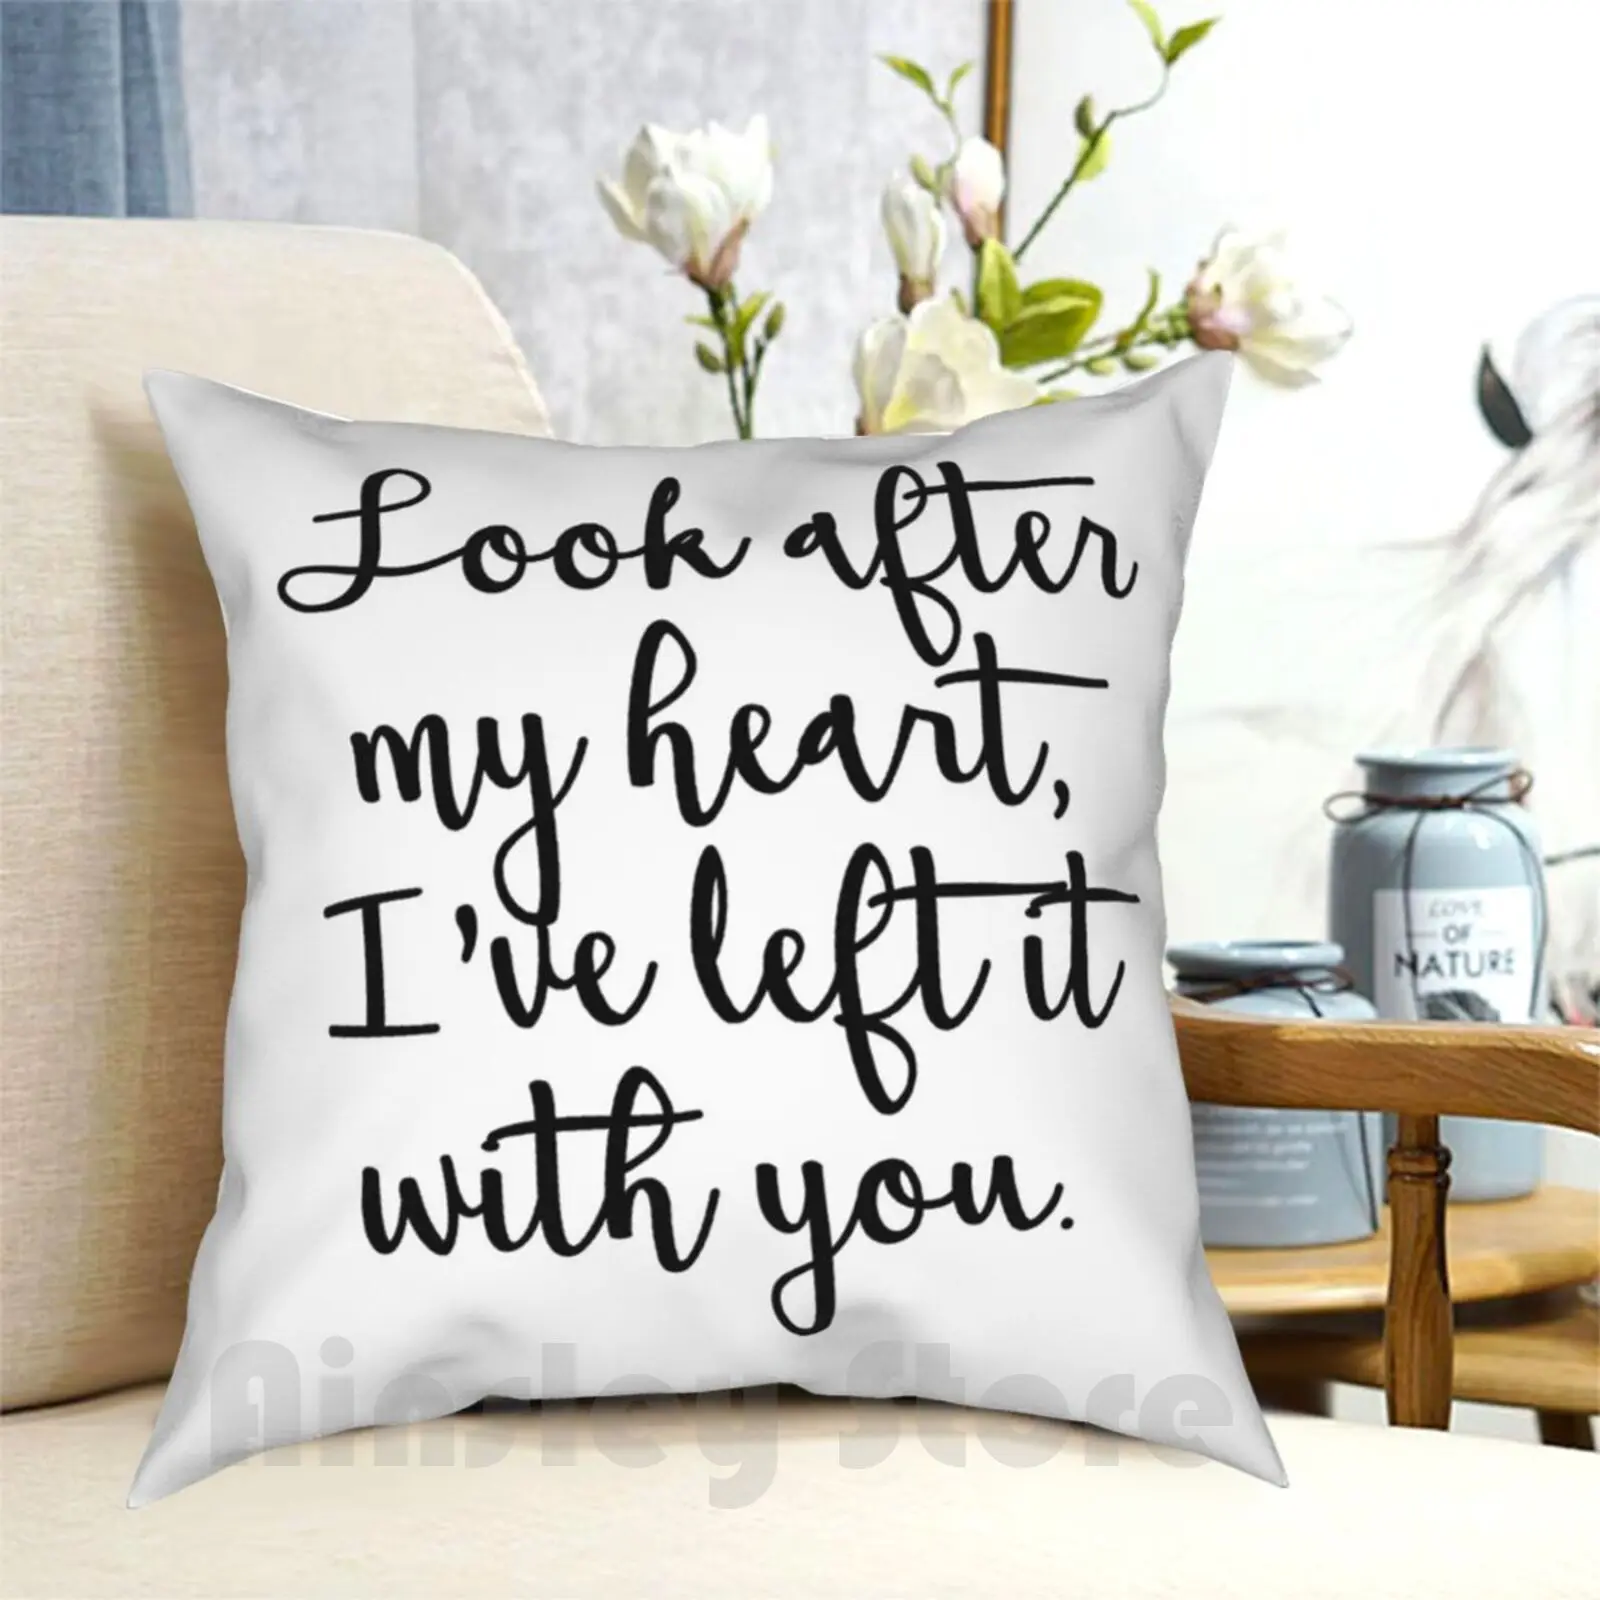 

Look After My Heart , I'Ve Left It With You. Pillow Case Printed Home Soft DIY Pillow cover Edward Cullen Twilight Saga